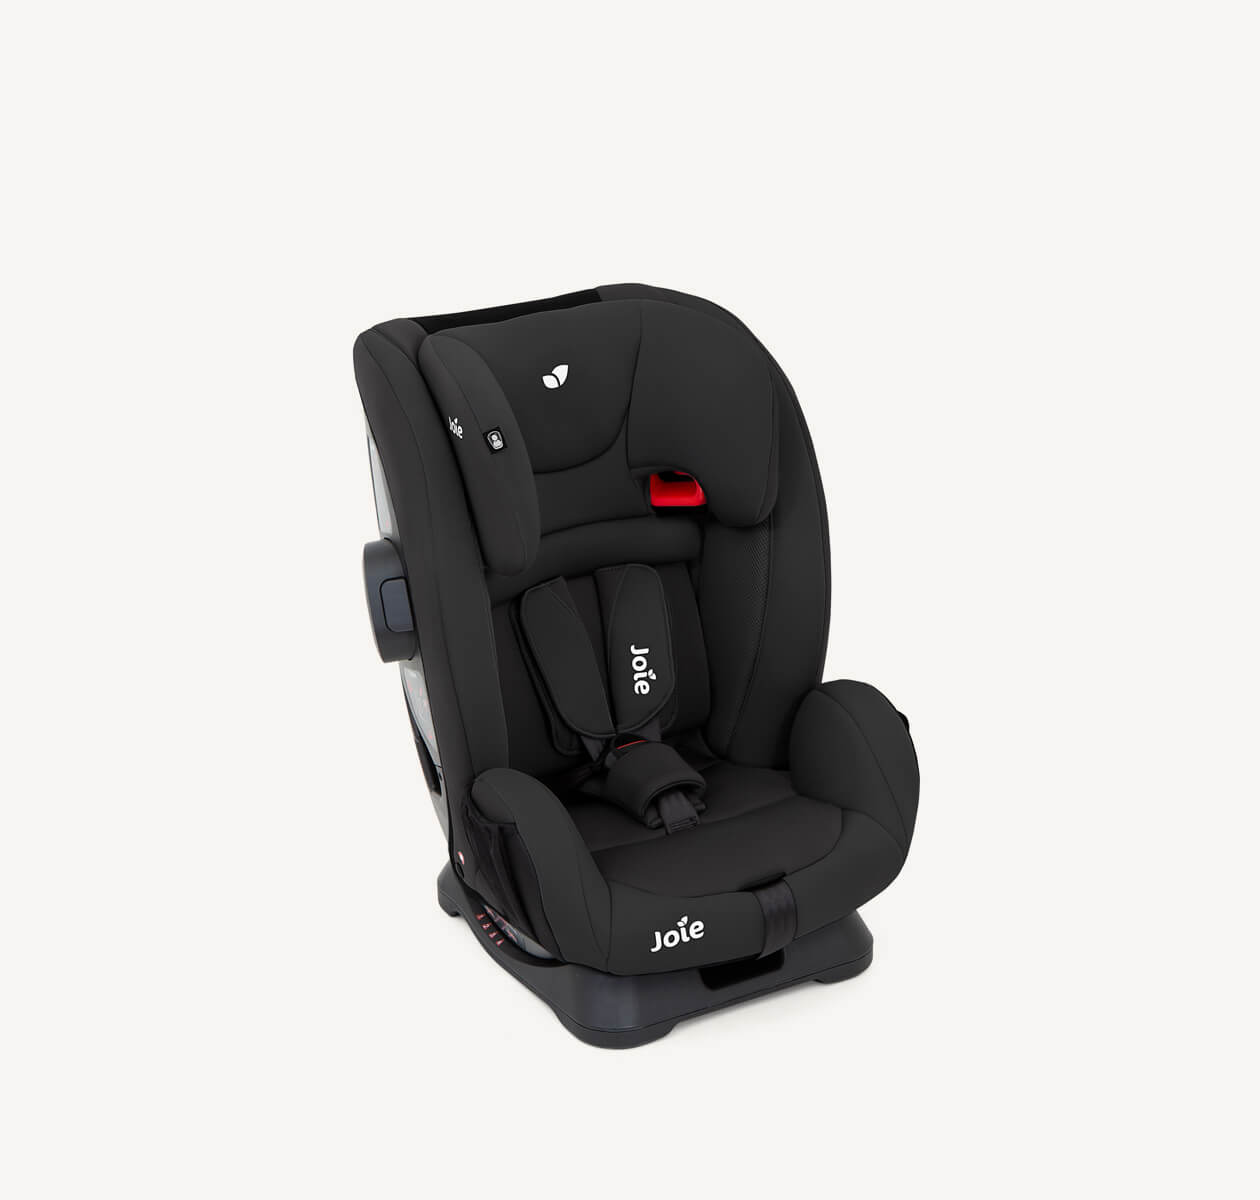 Joie fortify R child car seat in black facing at a right angle with the headrest fully lowered.